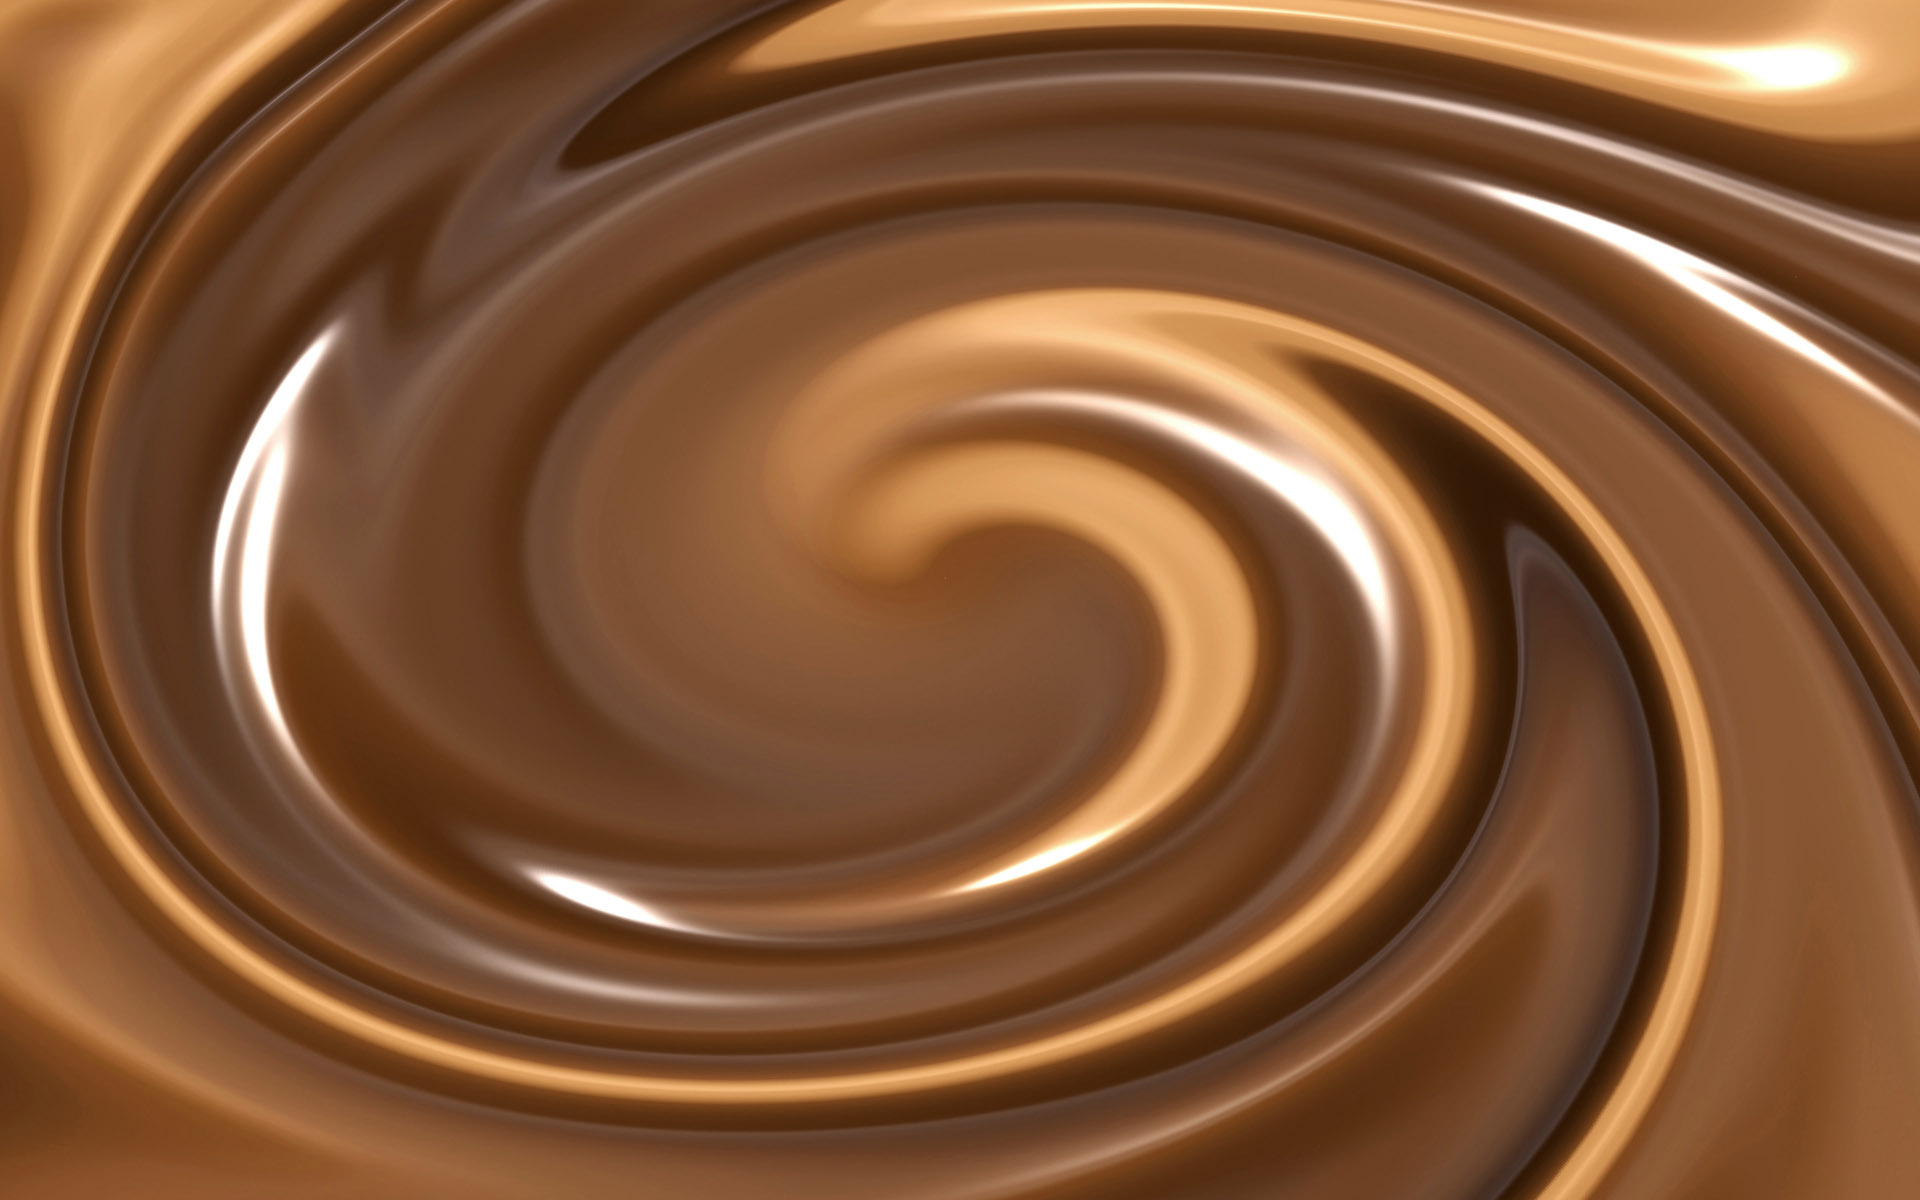 Liquid, Hot Chocolate, Hot Chocolate, Download Photo, - Hot Chocolate Texture , HD Wallpaper & Backgrounds